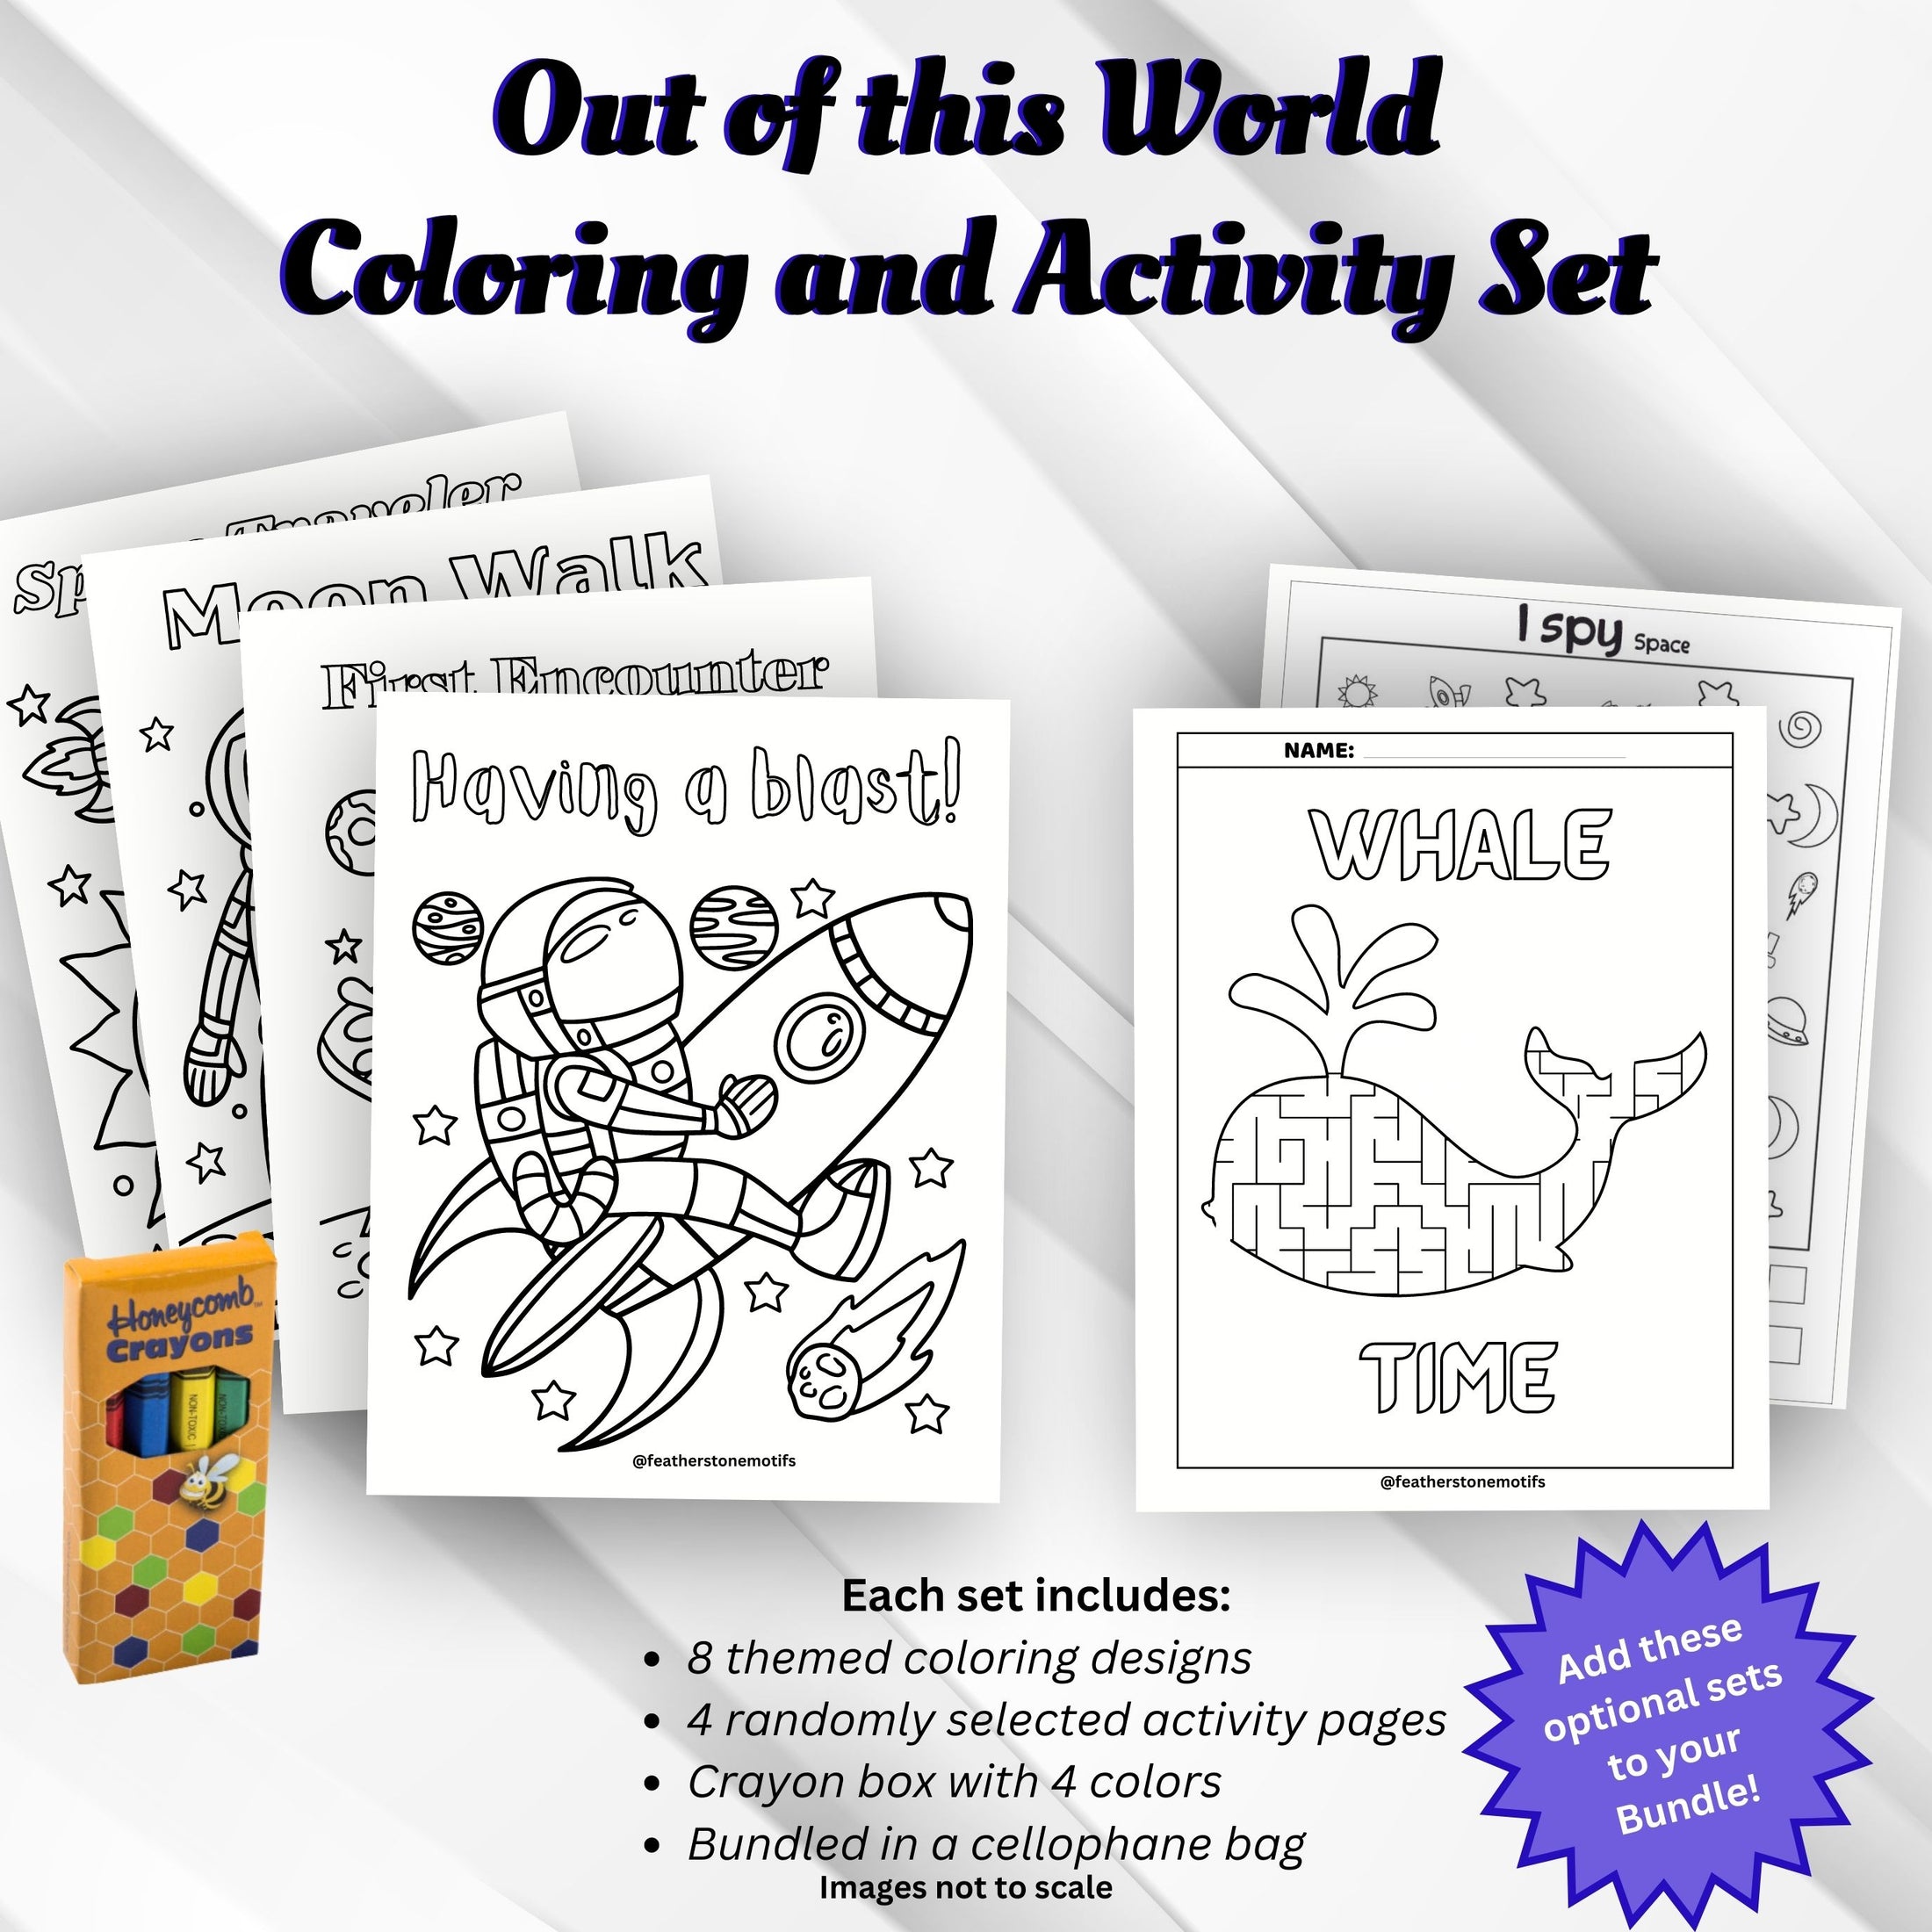 This image shows the optional coloring and activity sets that can be added to the order.